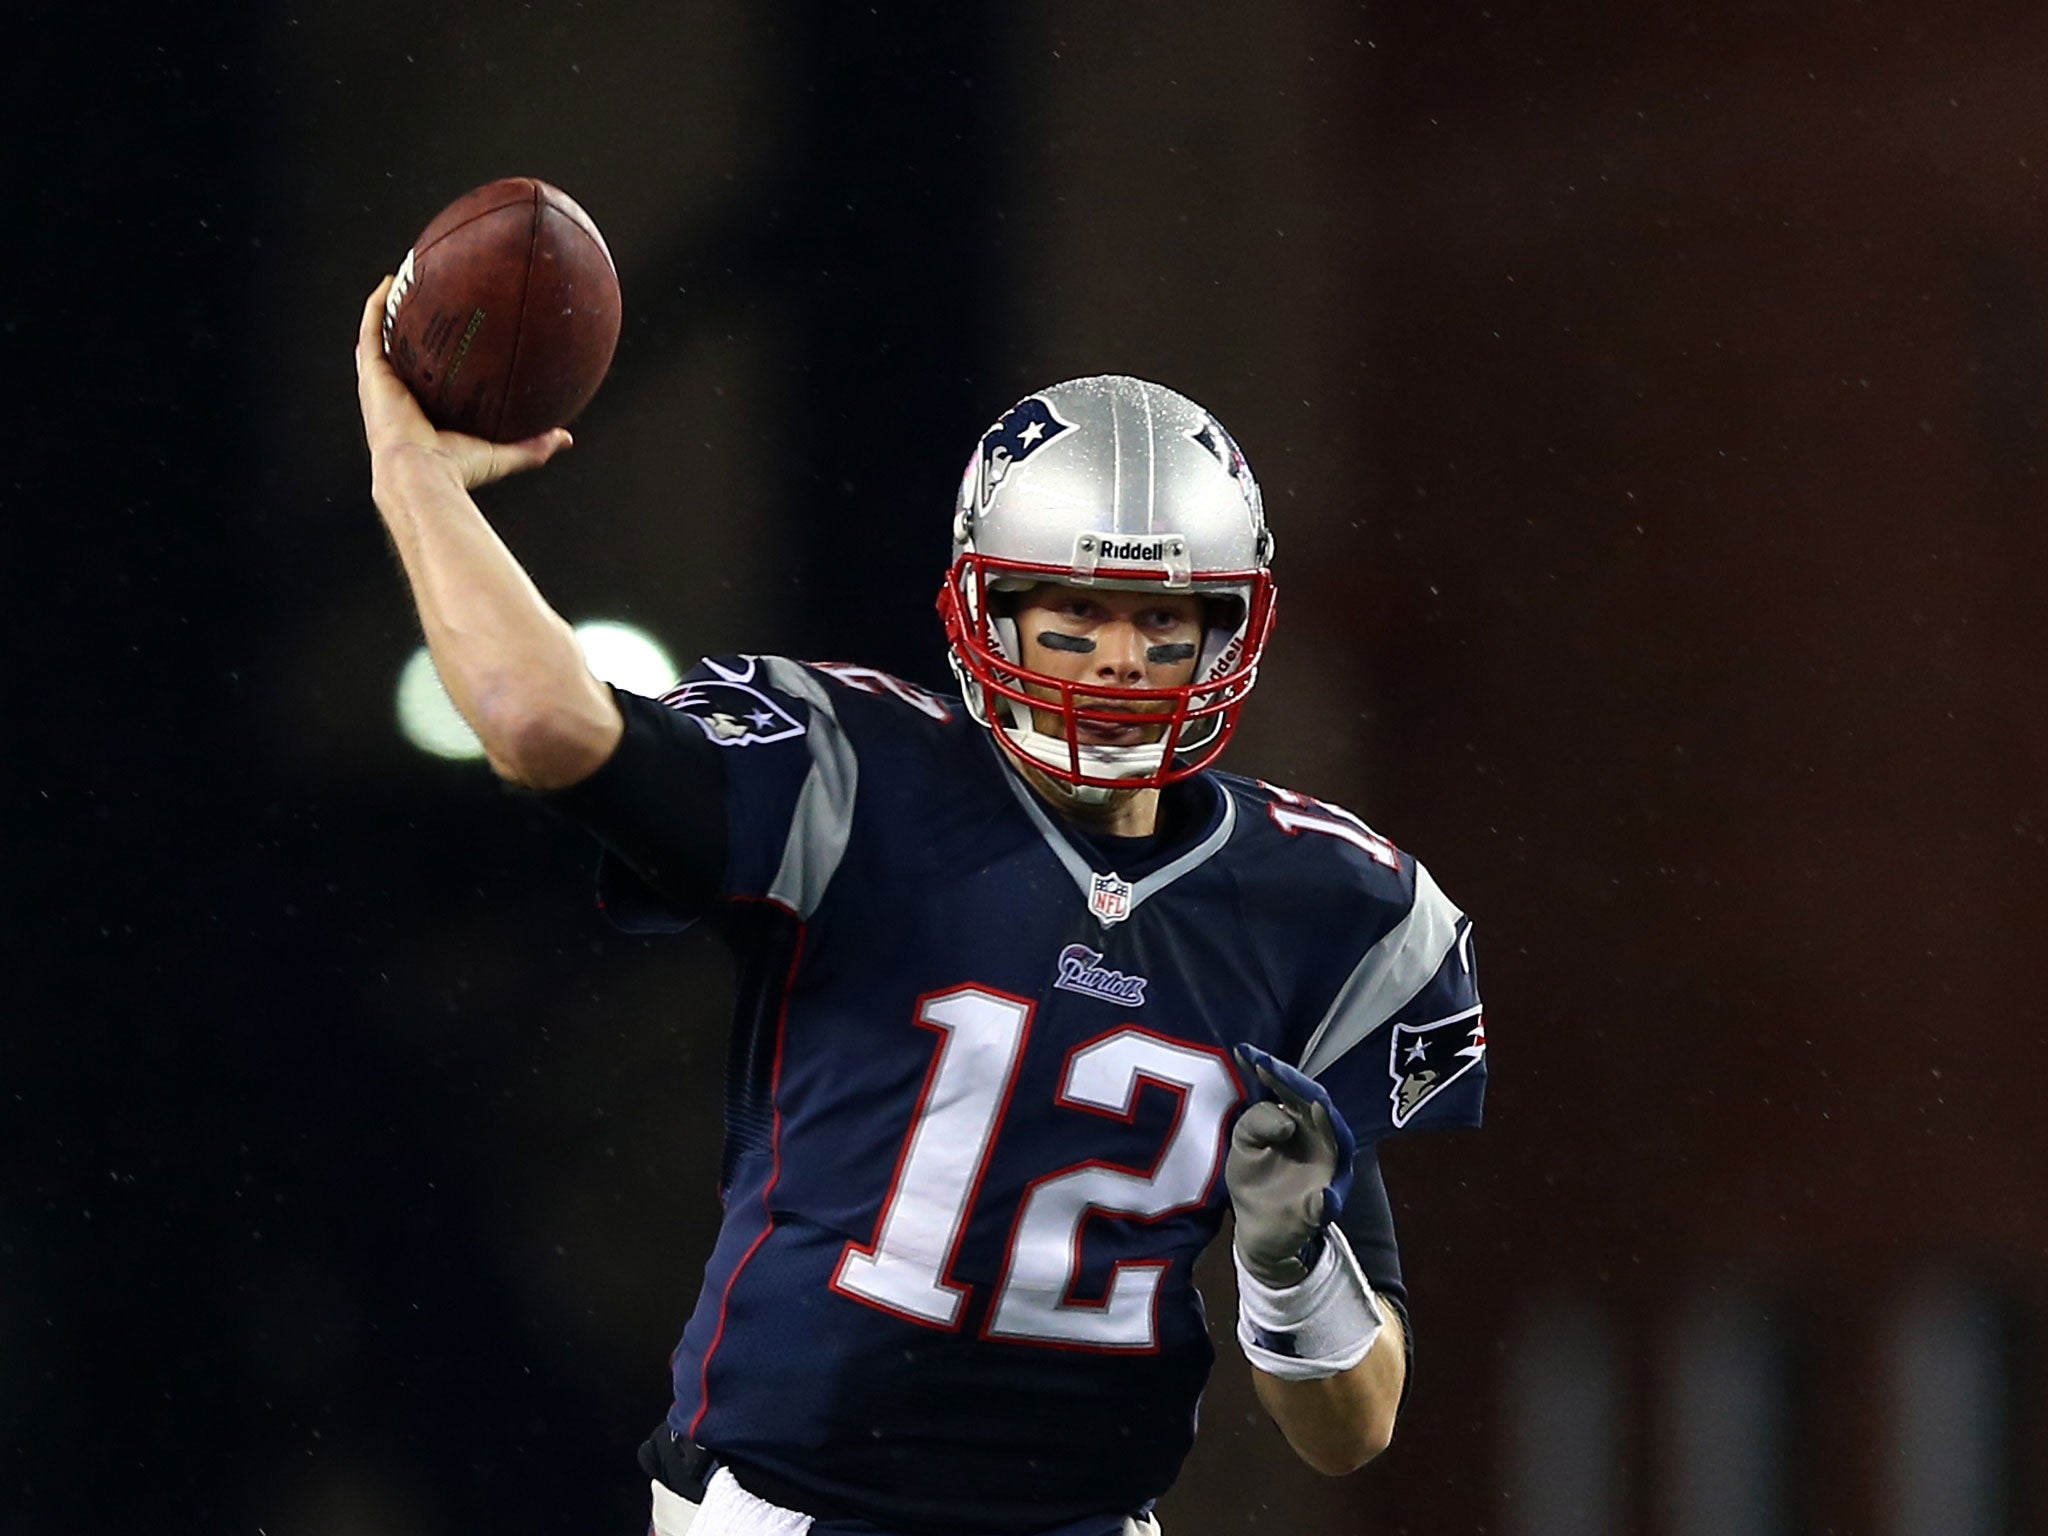 Tom Brady will go up against arch-rival Peyton Manning on Saturday